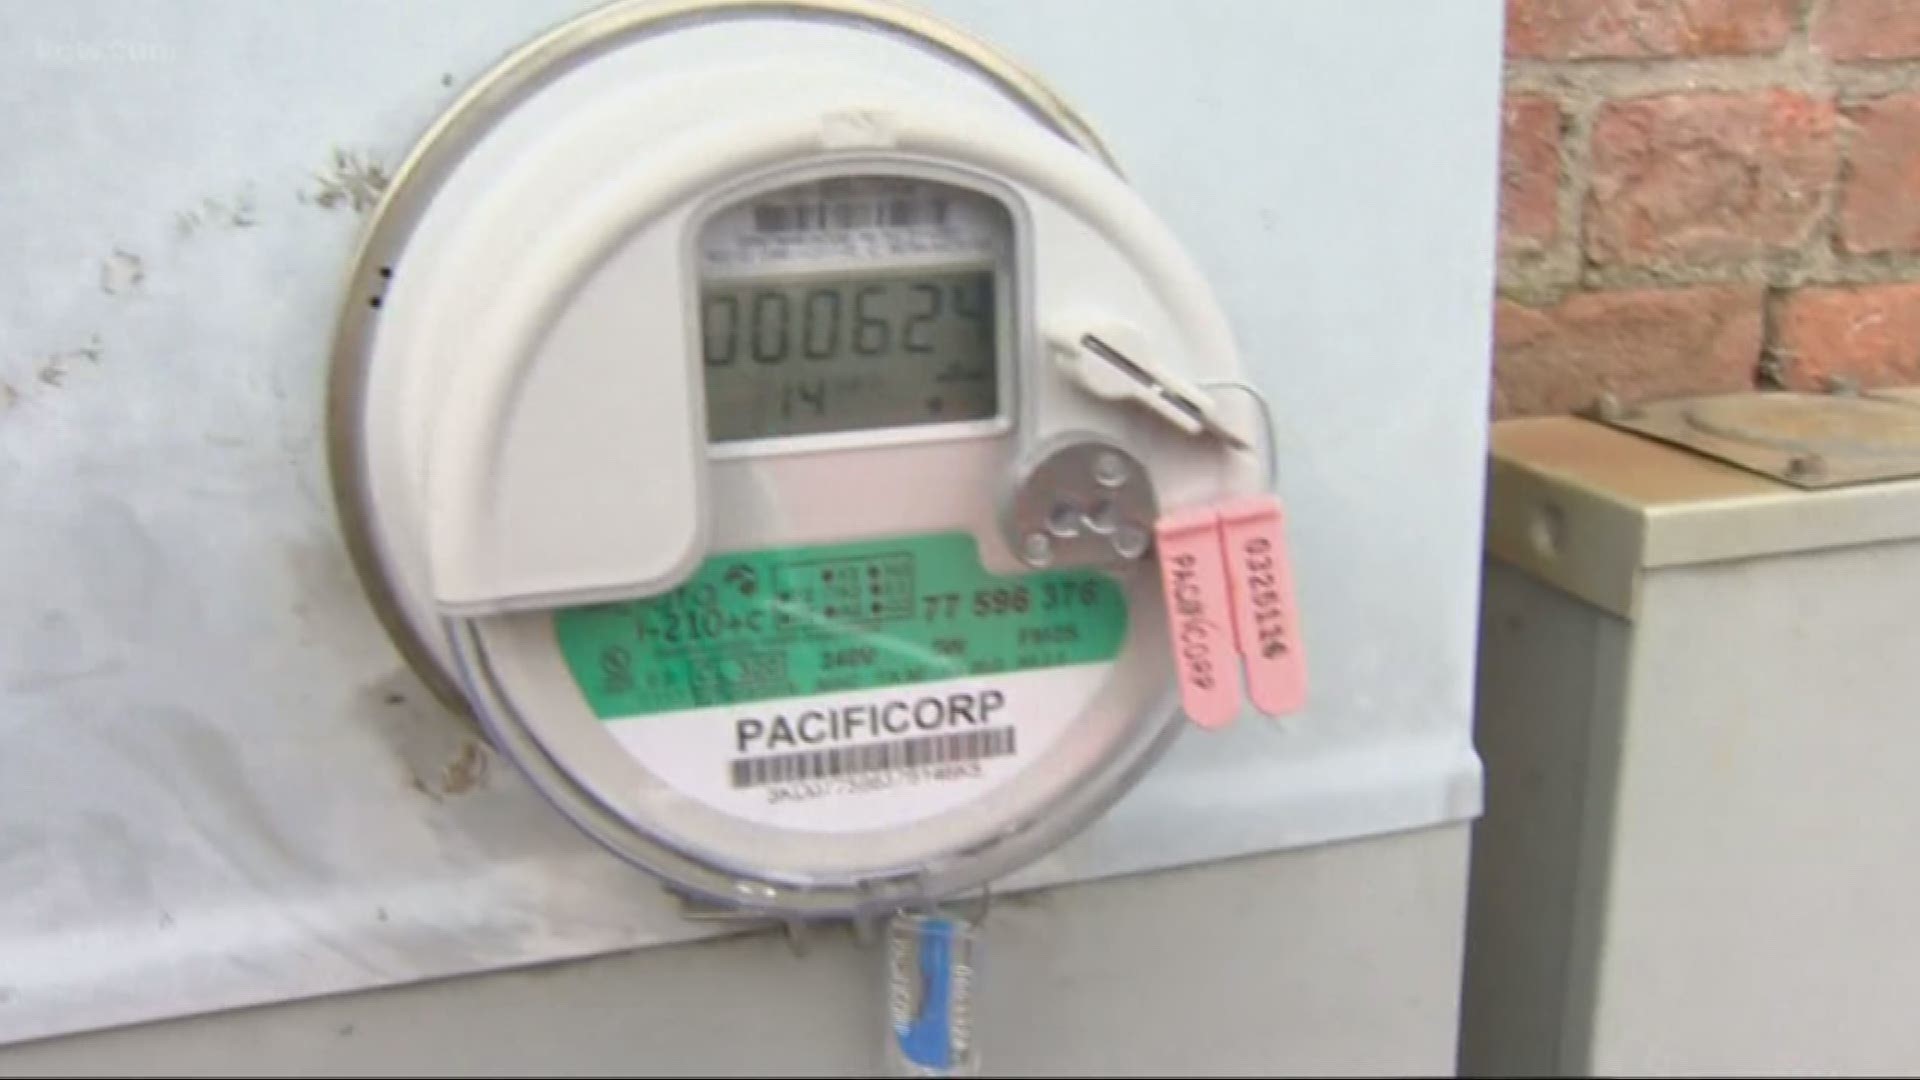 PGE is offering rebate to customers who avoid using their appliances or cranking up the air conditioner during peak hours.